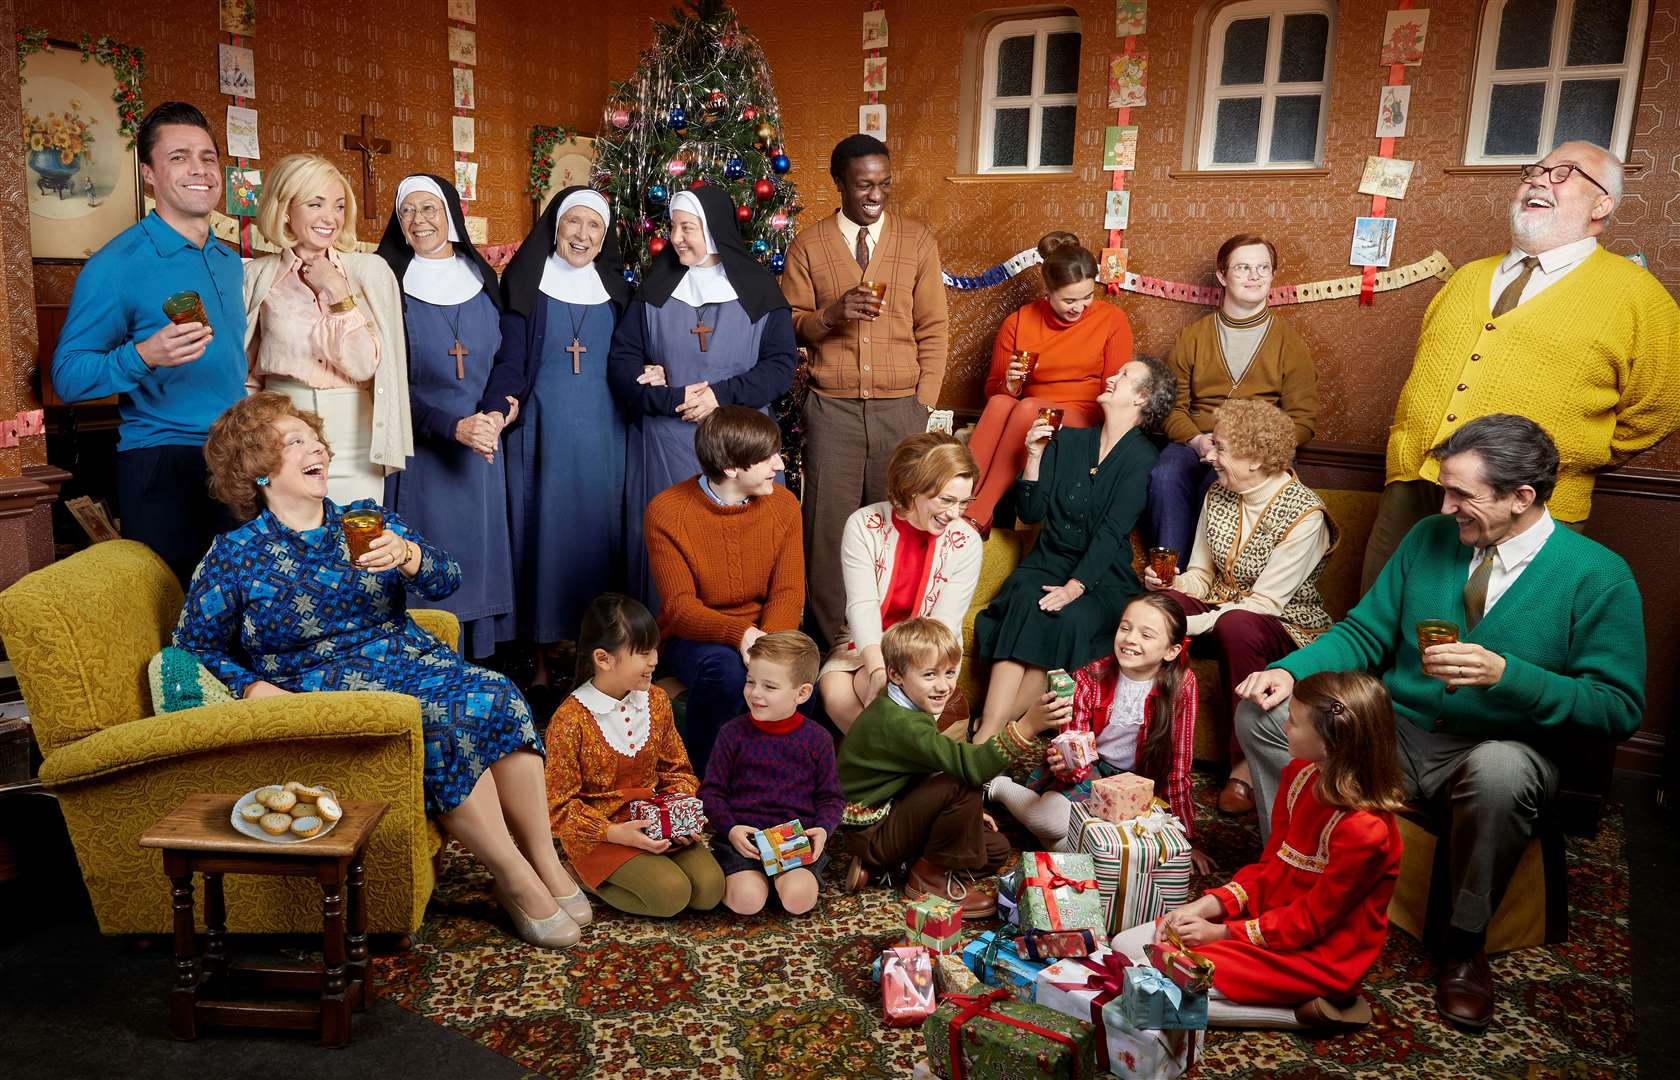 The cast of Call the Midwife